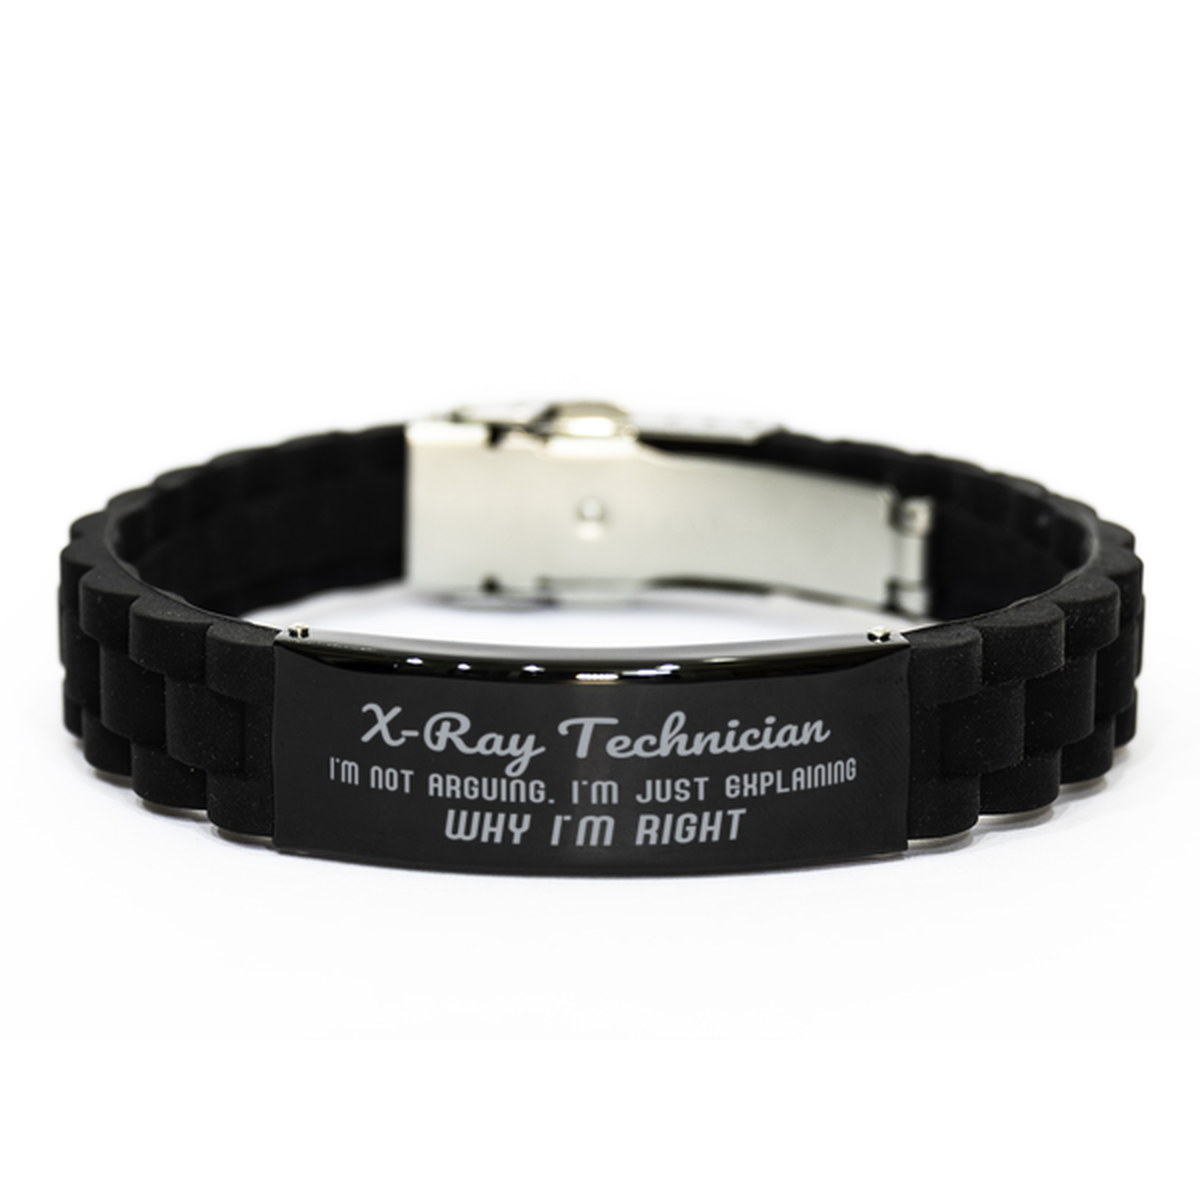 X-Ray Technician I'm not Arguing. I'm Just Explaining Why I'm RIGHT Black Glidelock Clasp Bracelet, Funny Saying Quote X-Ray Technician Gifts For X-Ray Technician Graduation Birthday Christmas Gifts for Men Women Coworker